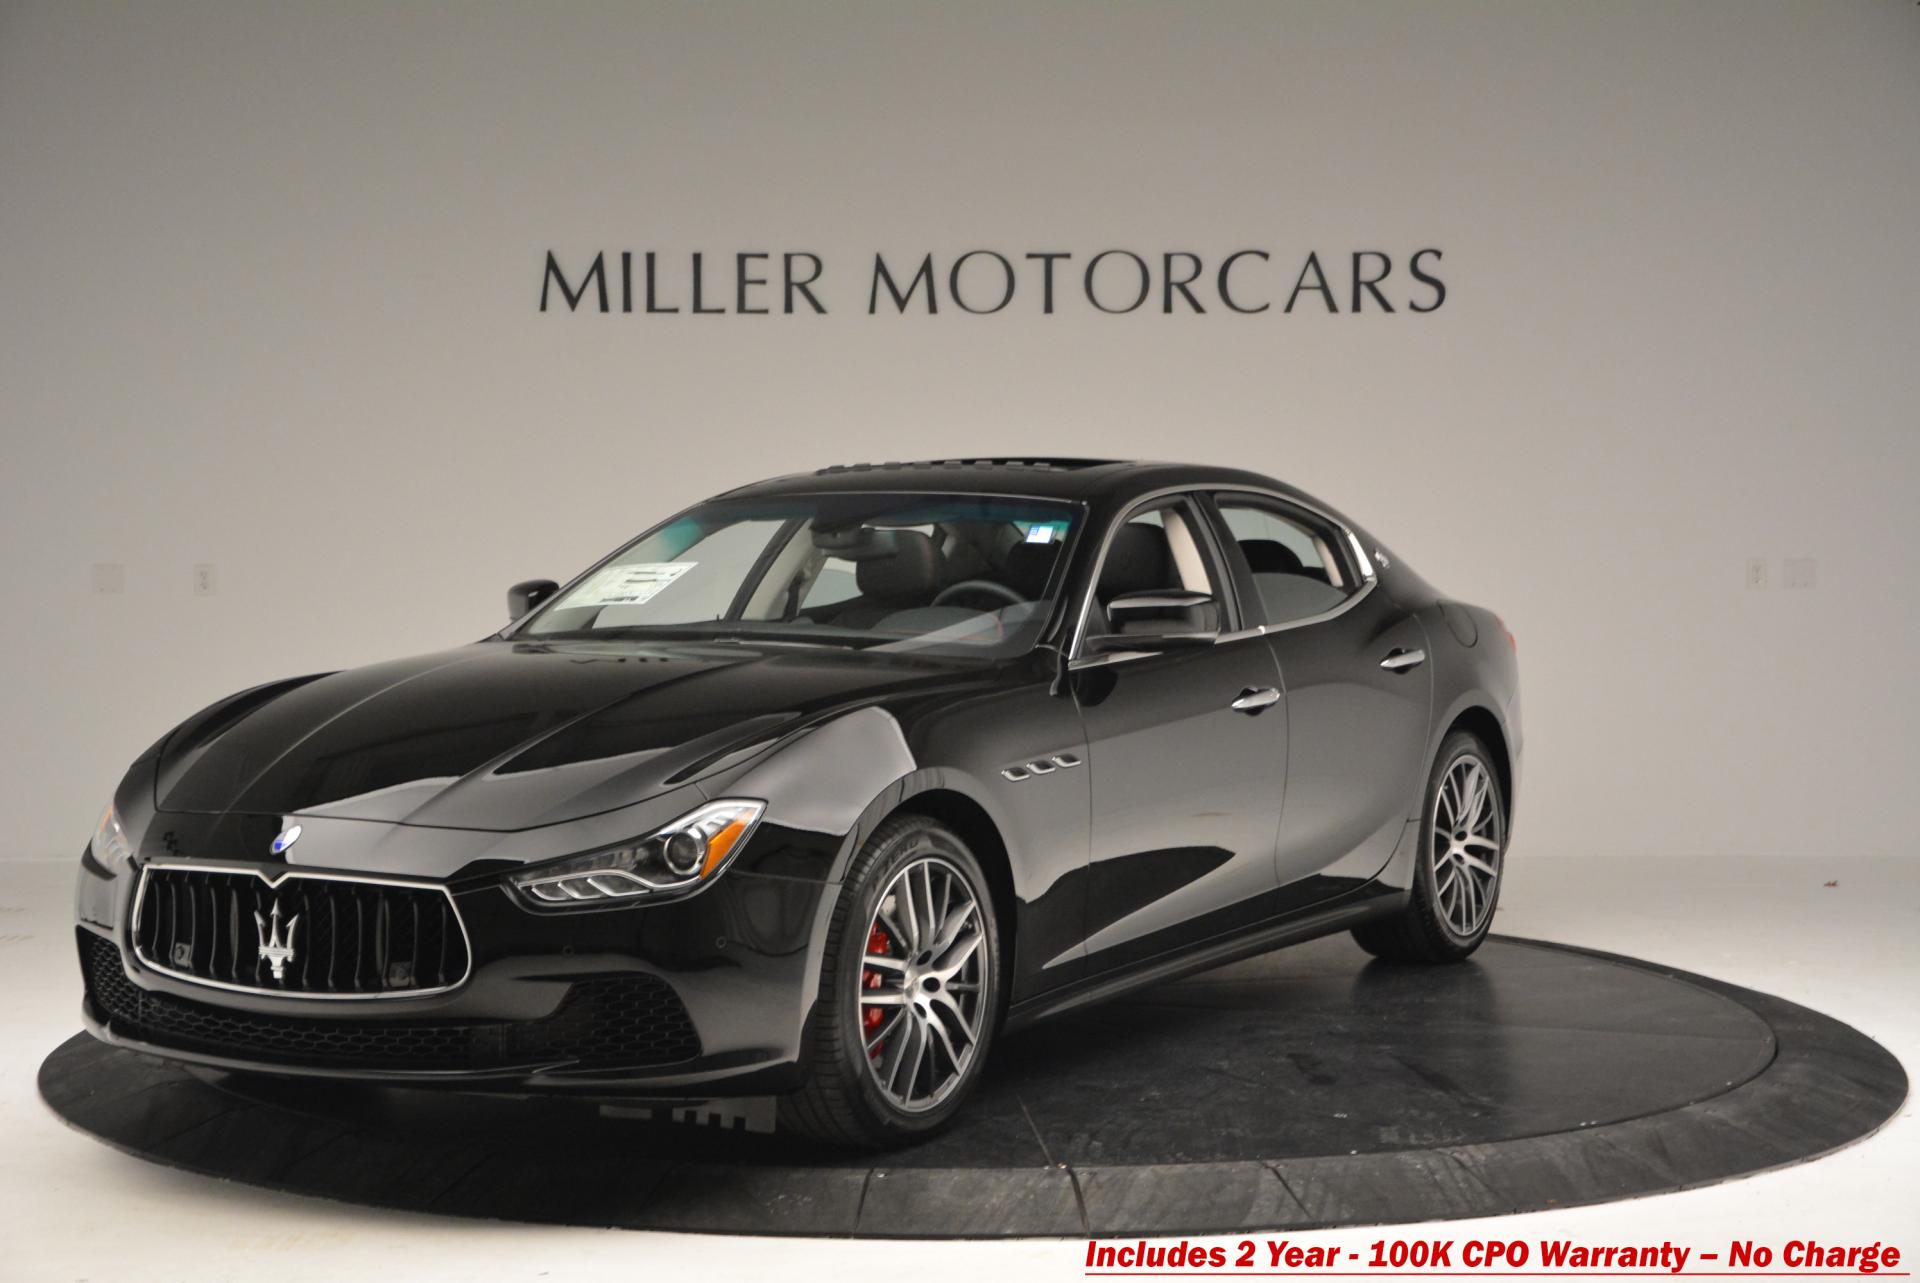 Used 2016 Maserati Ghibli S Q4 for sale Sold at Bentley Greenwich in Greenwich CT 06830 1